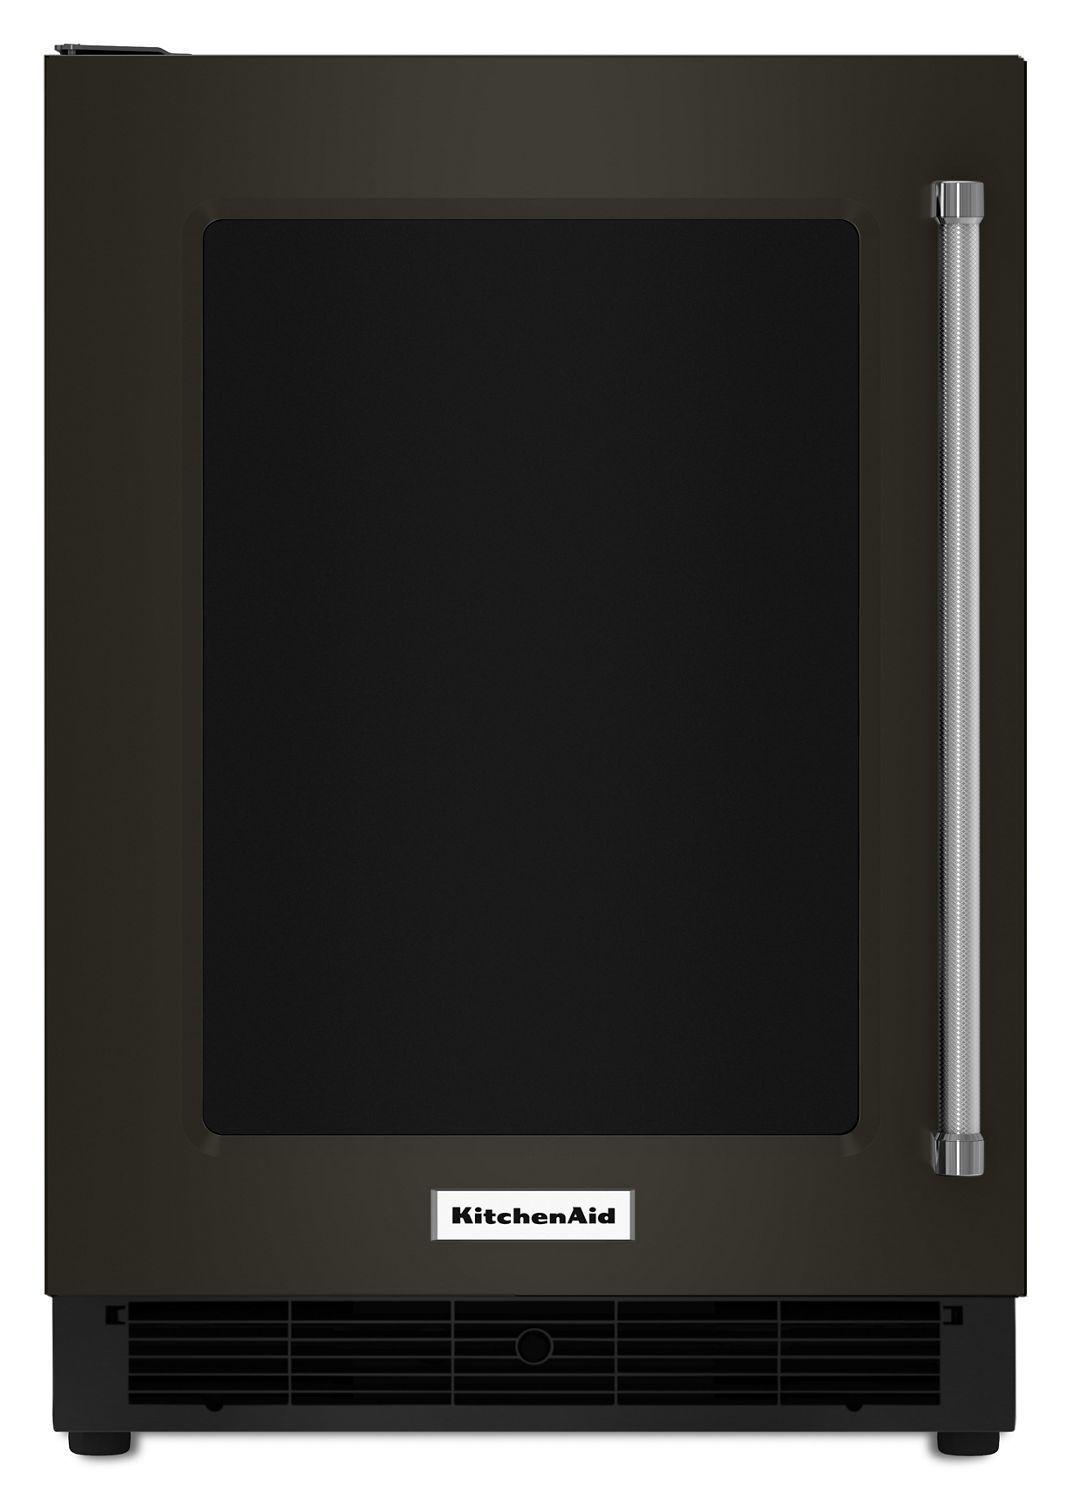 Kitchenaid 24" Undercounter Refrigerator with Glass Door and Metal Trim Shelves Black Stainless Steel with PrintShield™ Finish